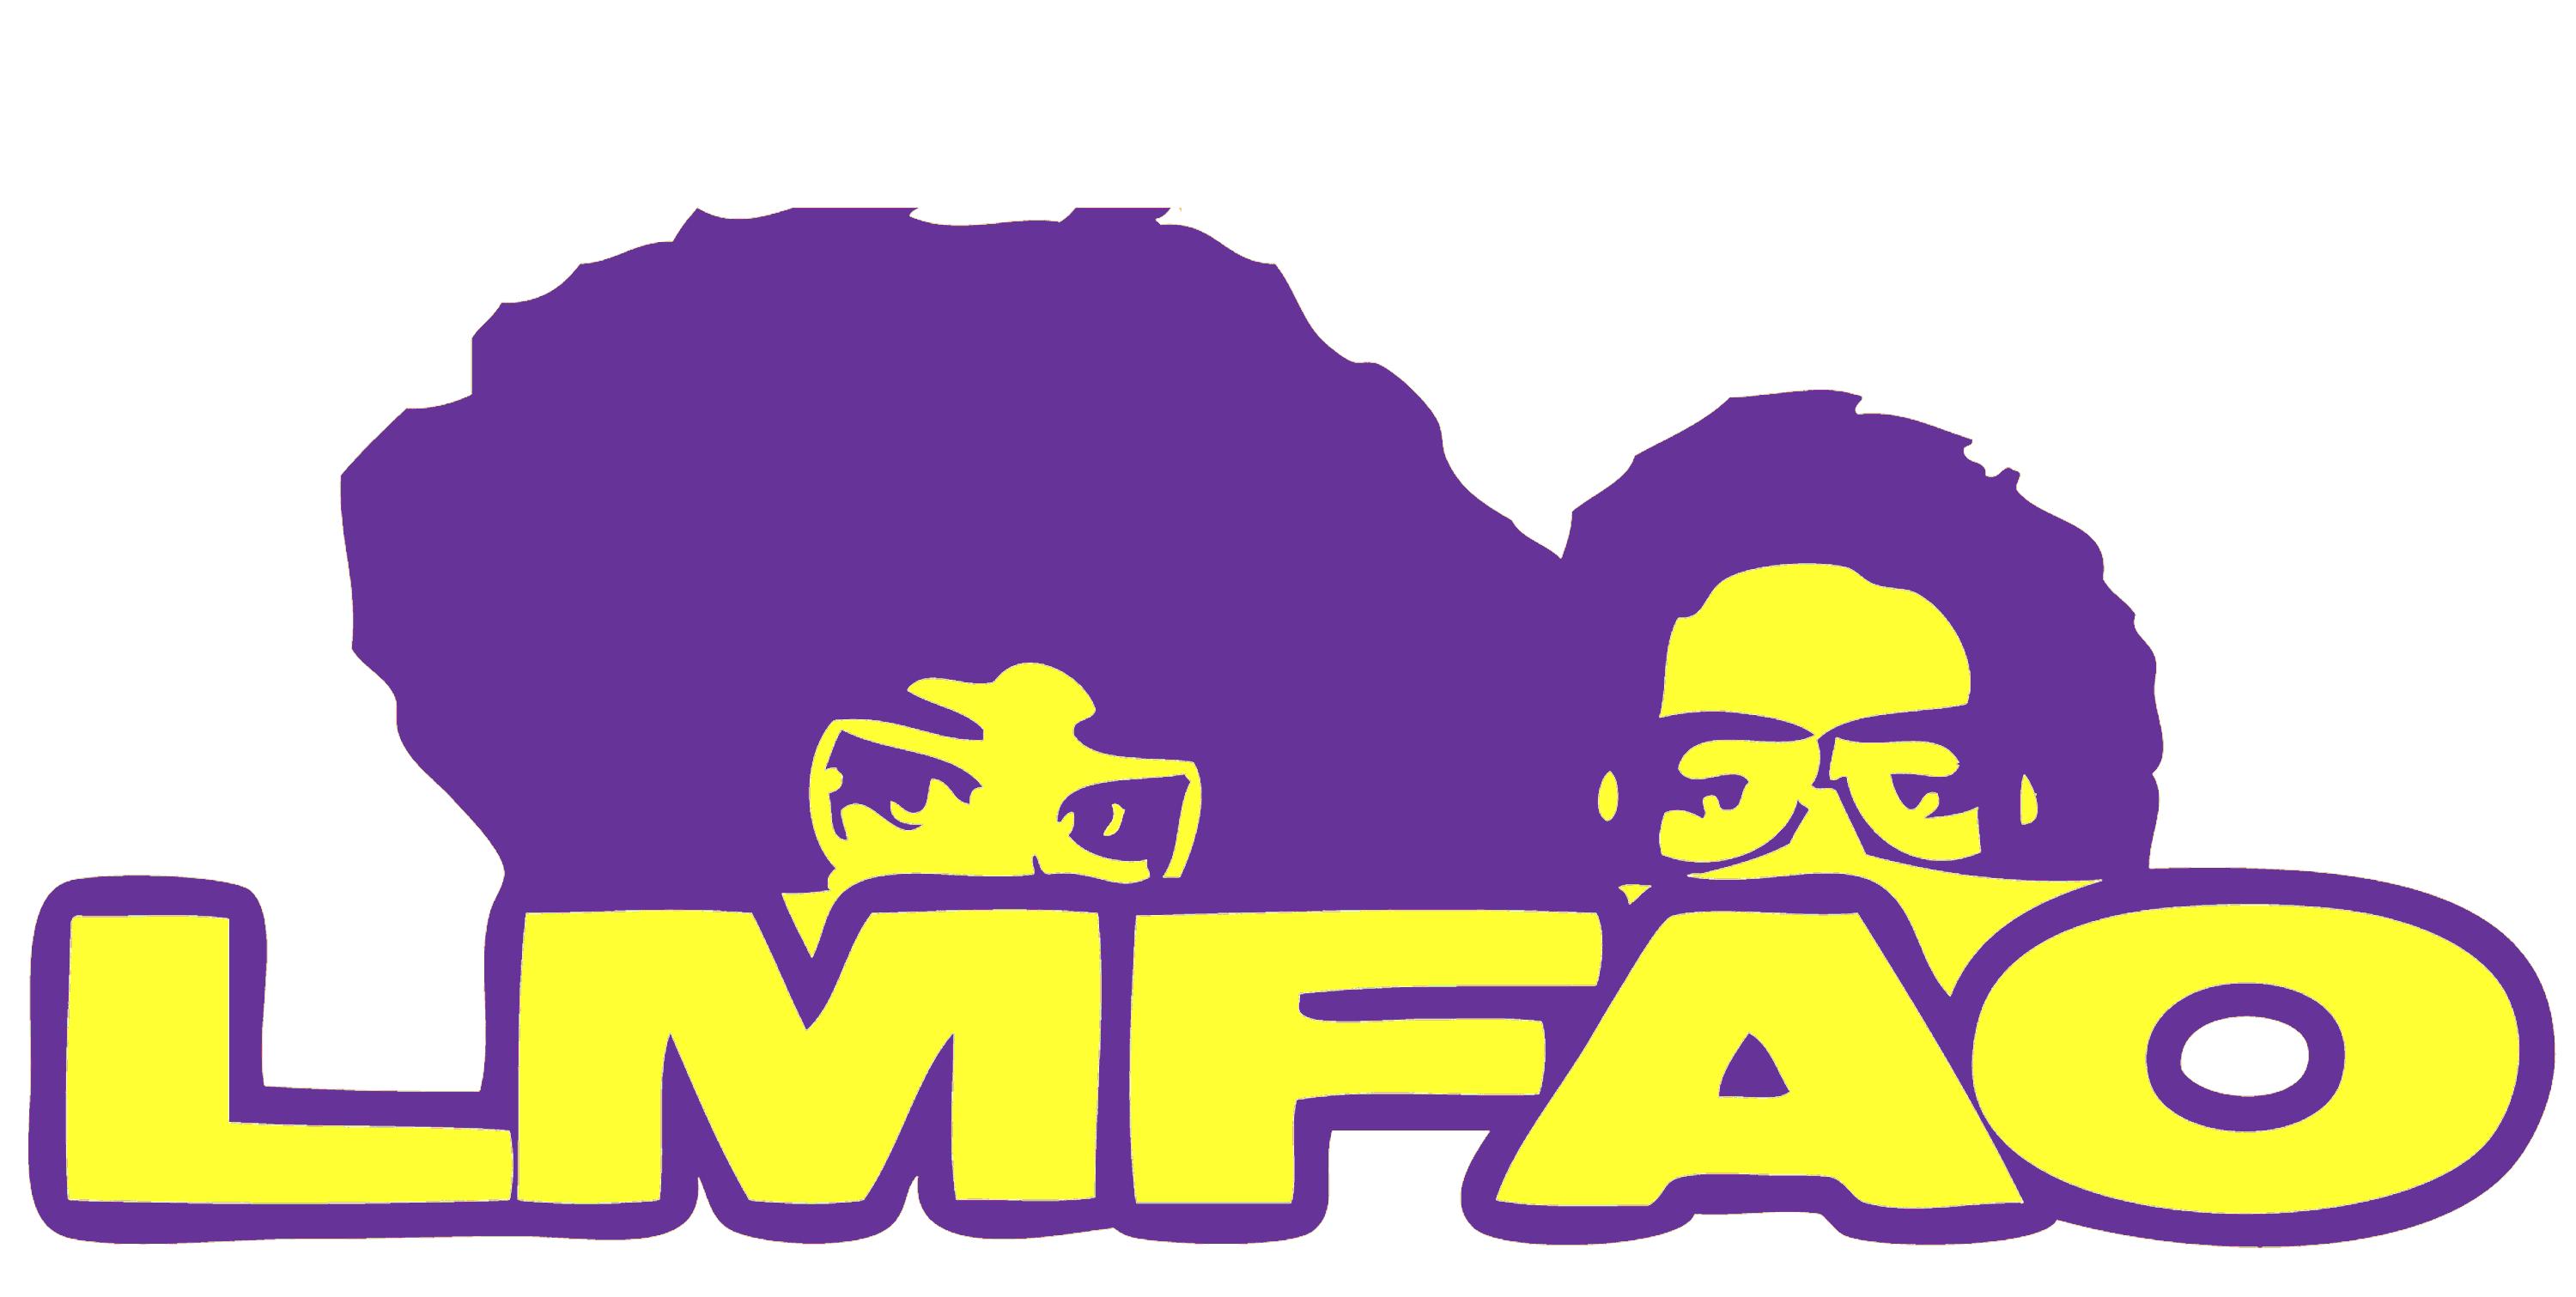 The Lmfao Wallpaper iPhone Android